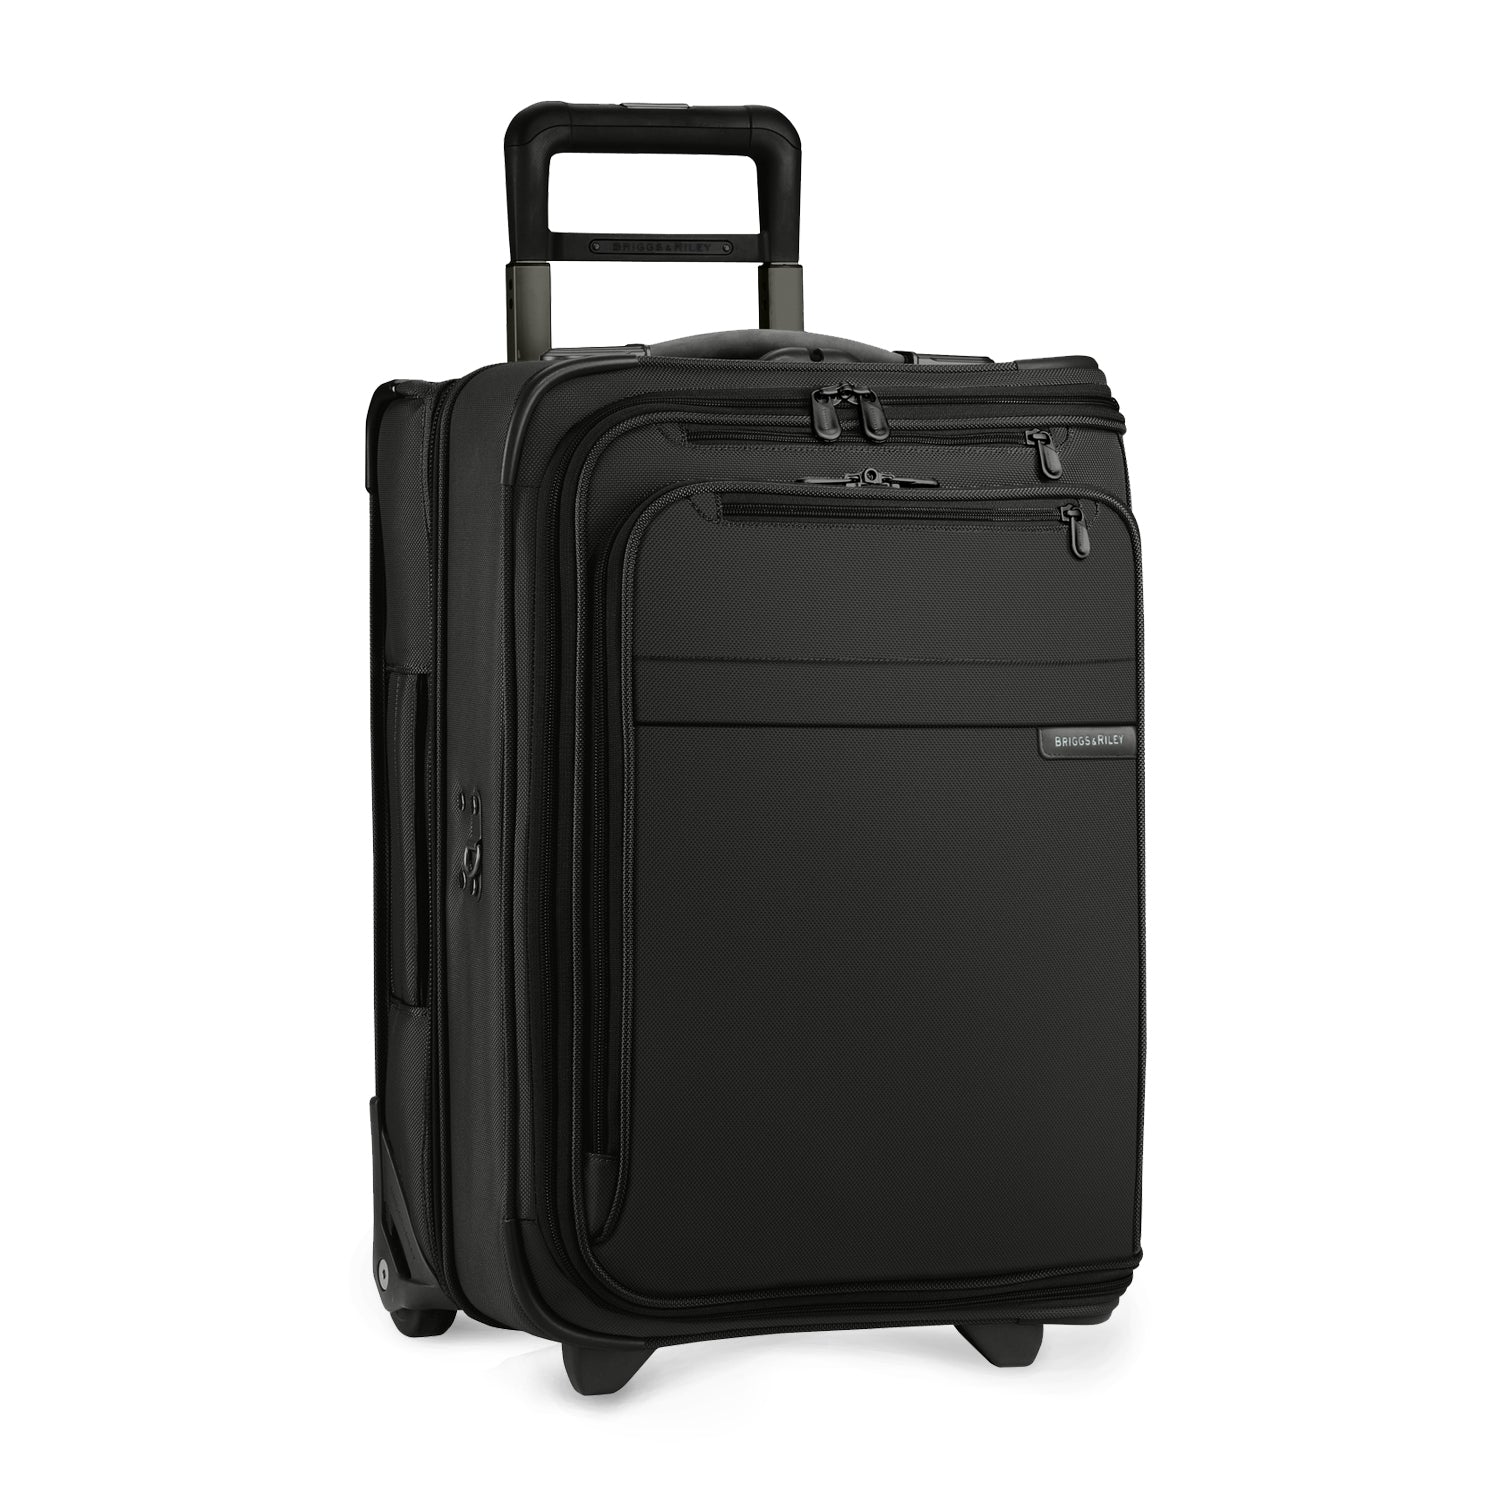 Carry-On Upright Garment Bag with 